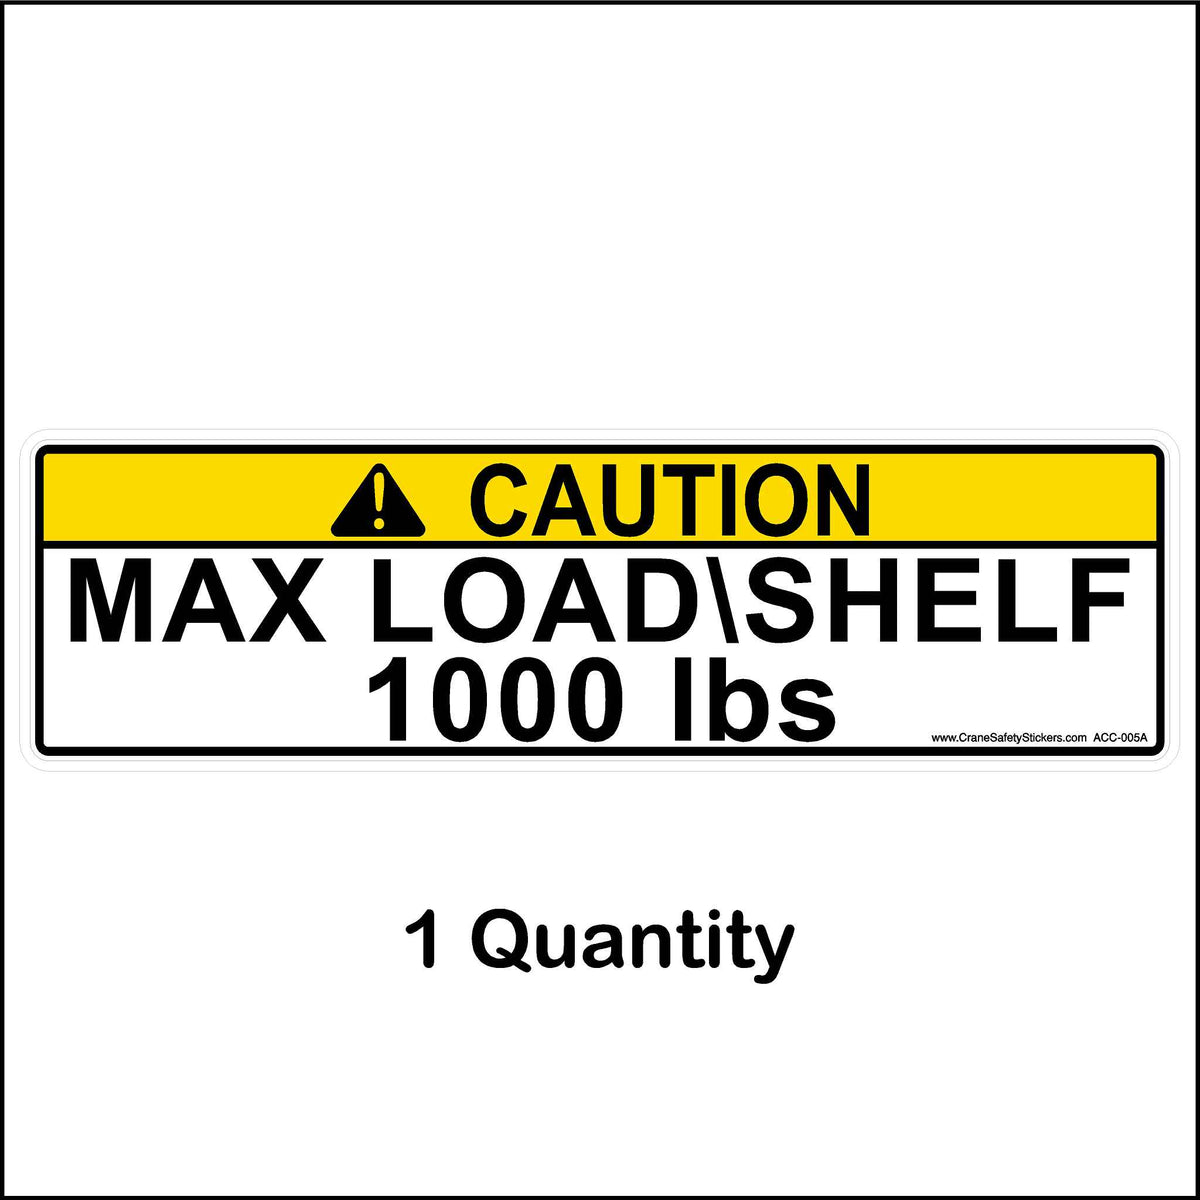 1000 lbs max load shelf Pallet Rack Weight Capacity Labels.